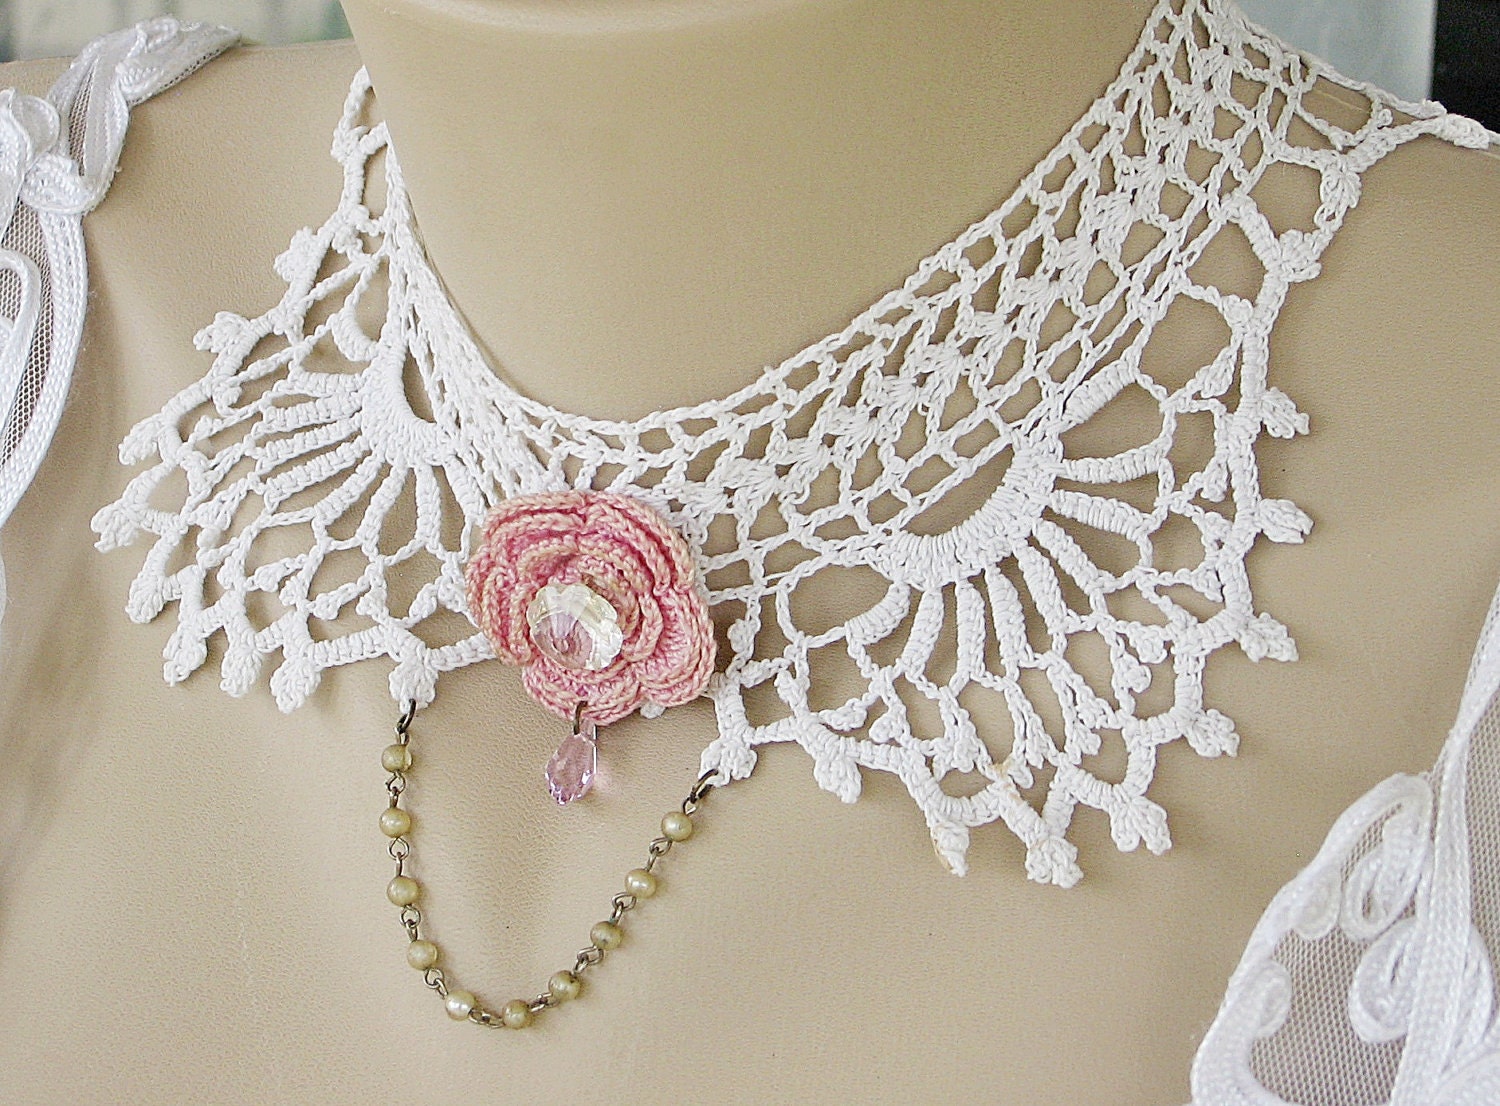 Upcycled Jewelry Vintage Lace Collar Vintage White Crochet